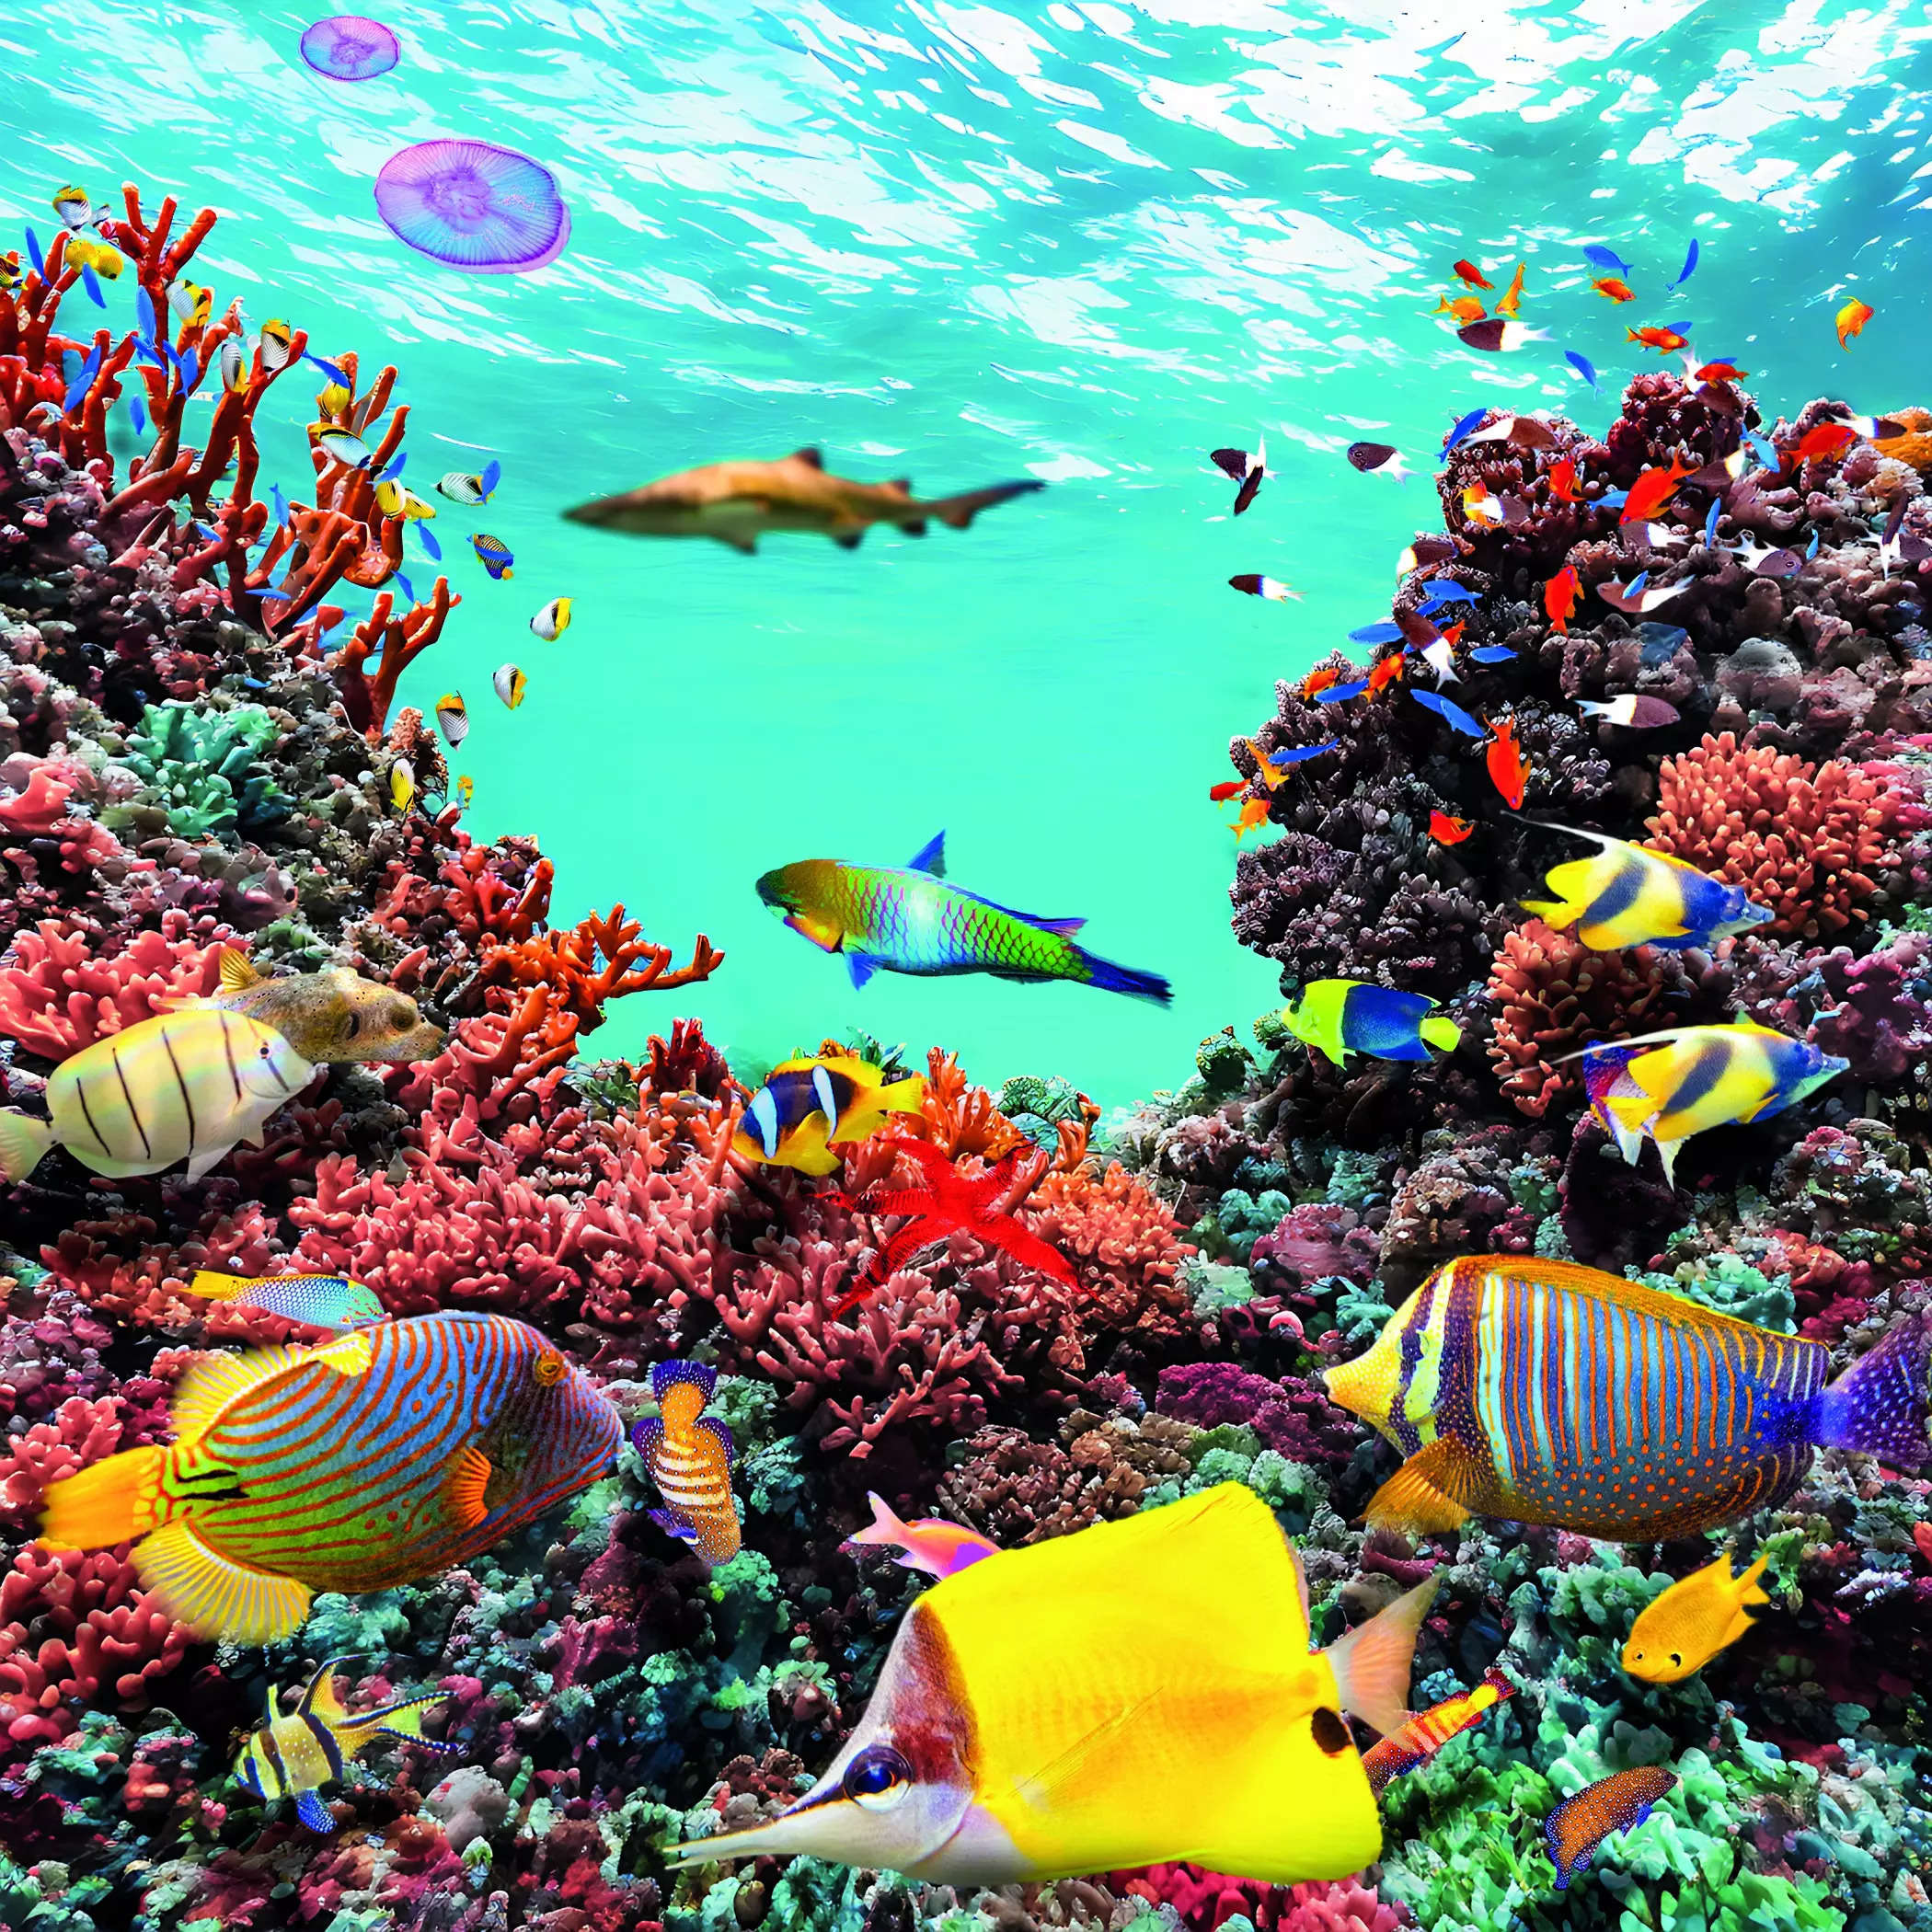 Into the Blue: India plans underwater research lab to explore marine life 